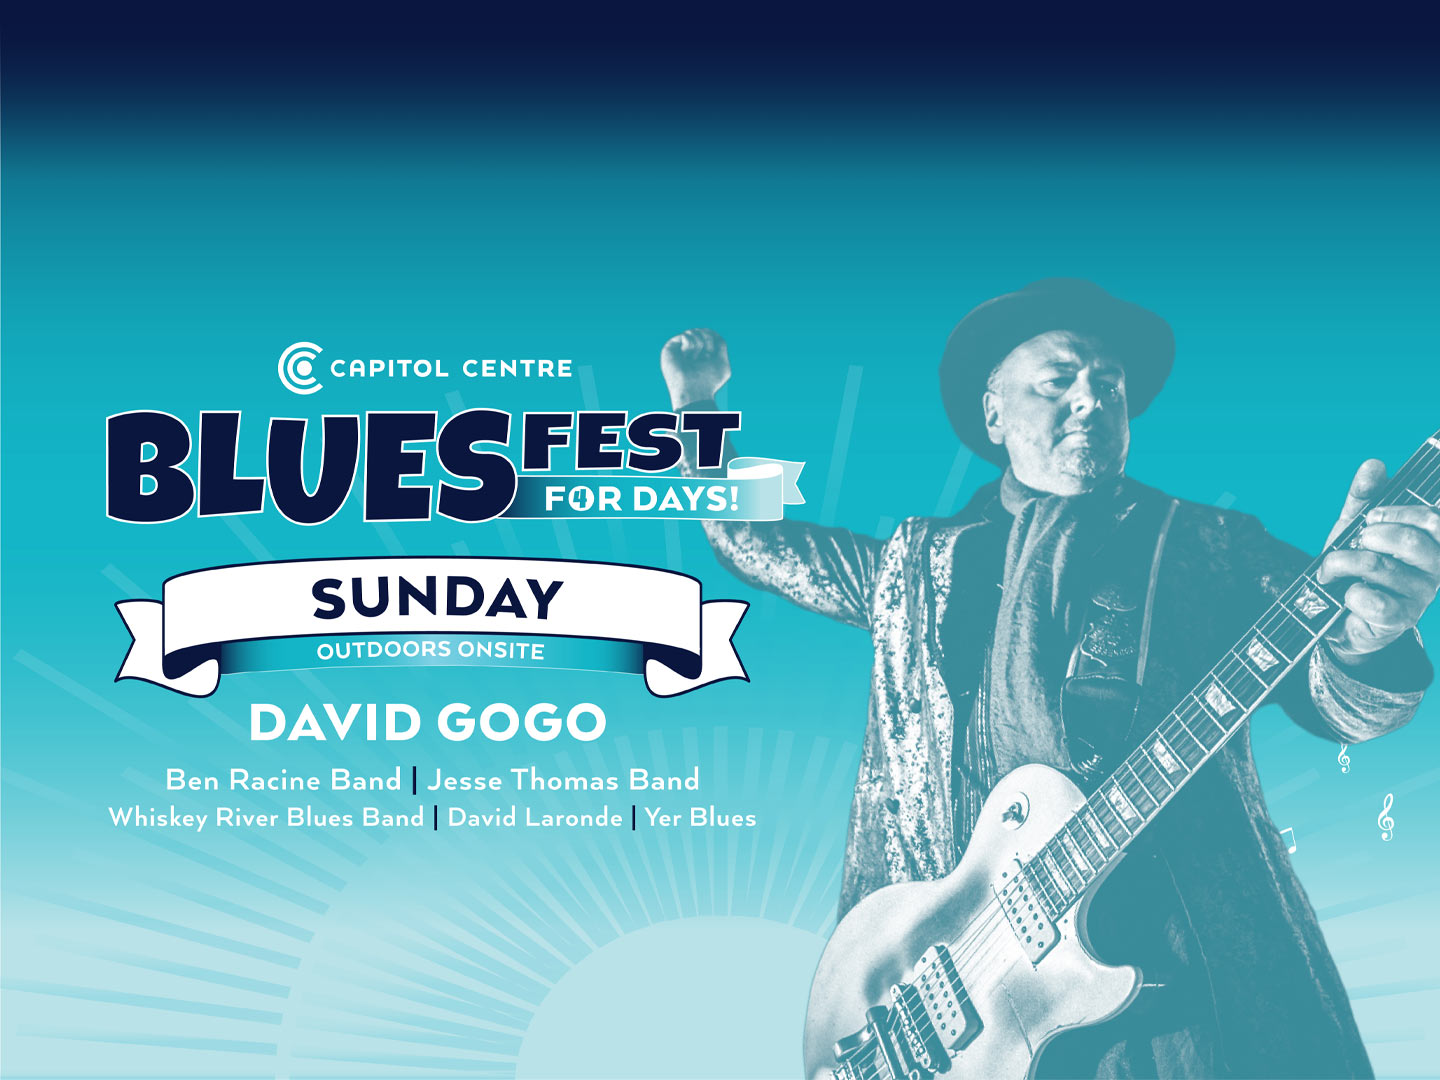 Bluesfest 2022 - Sunday Outdoor Concerts